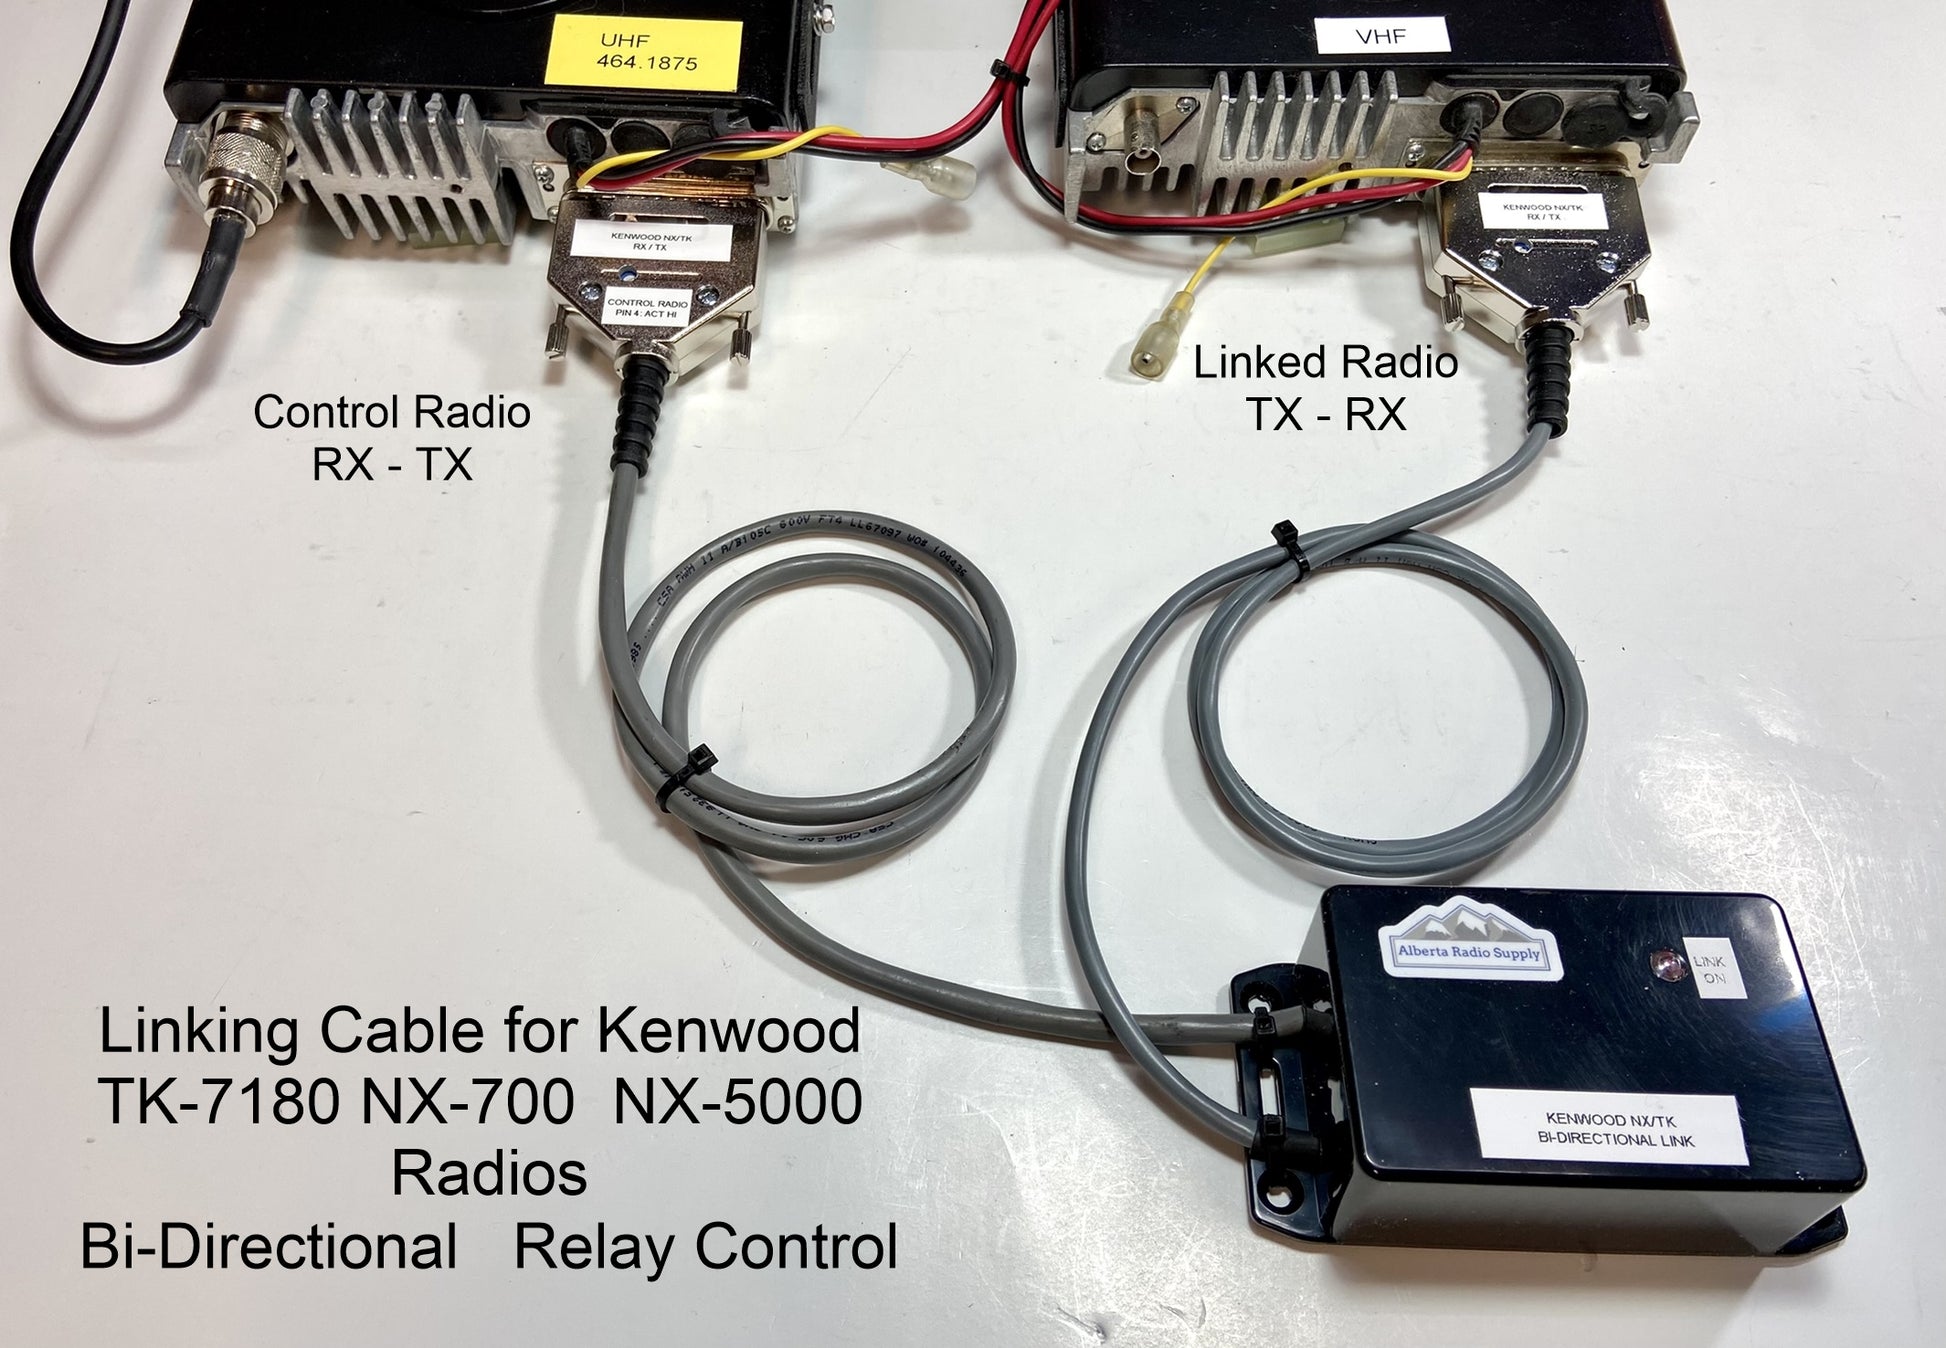 Linking Cable for Kenwood Radios